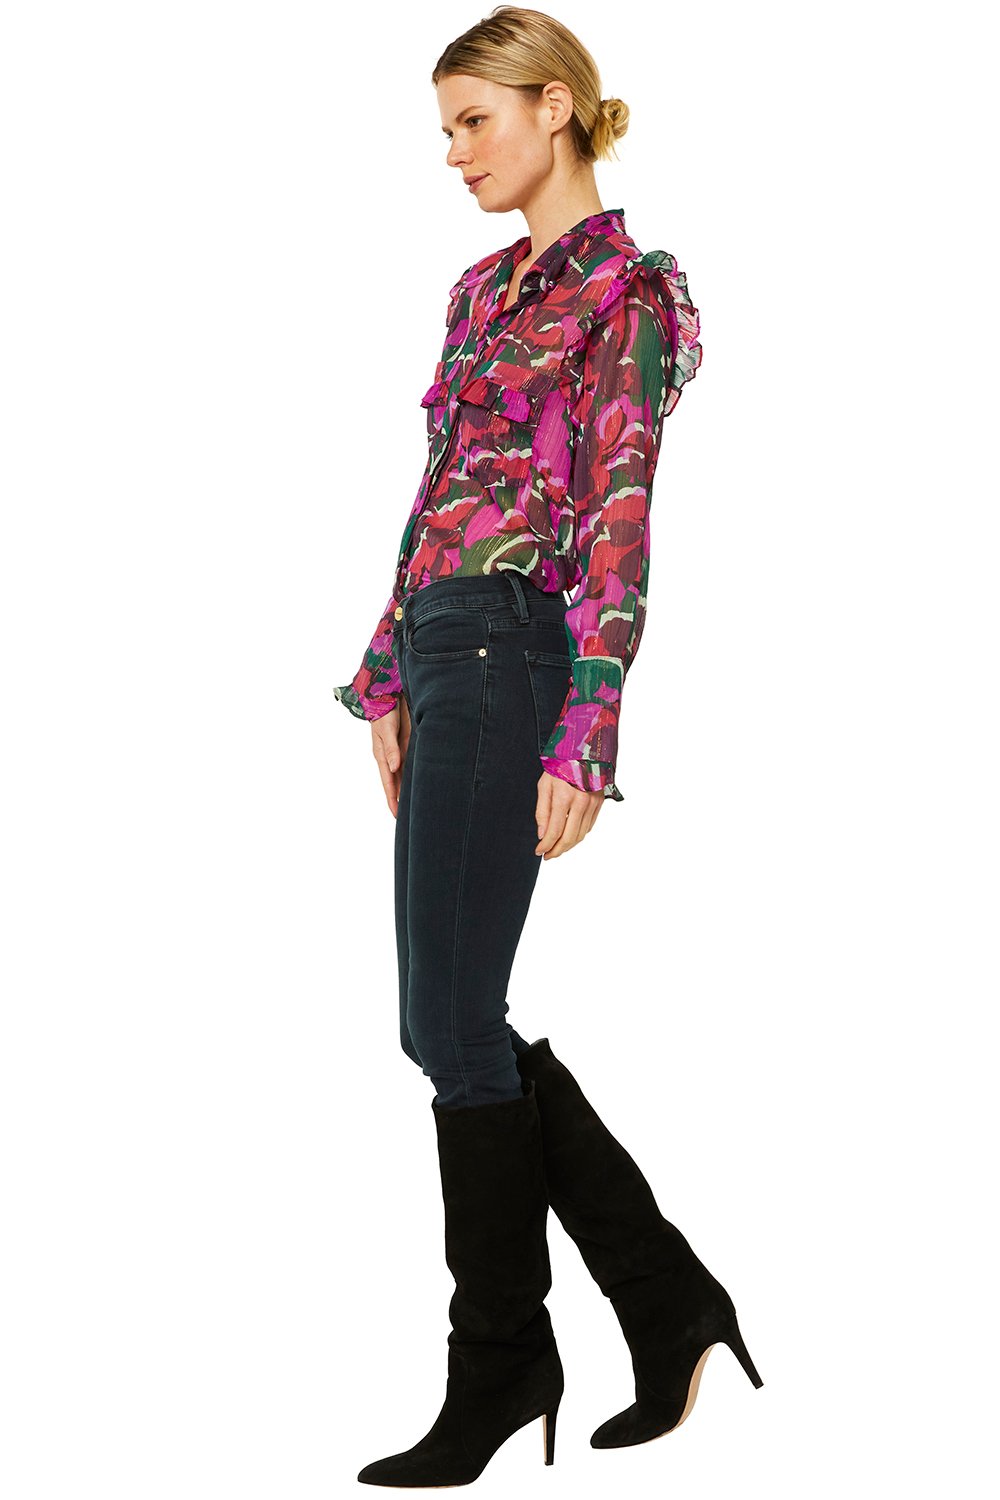 Misa - Anita Top in Holiday Sparkle Abstract